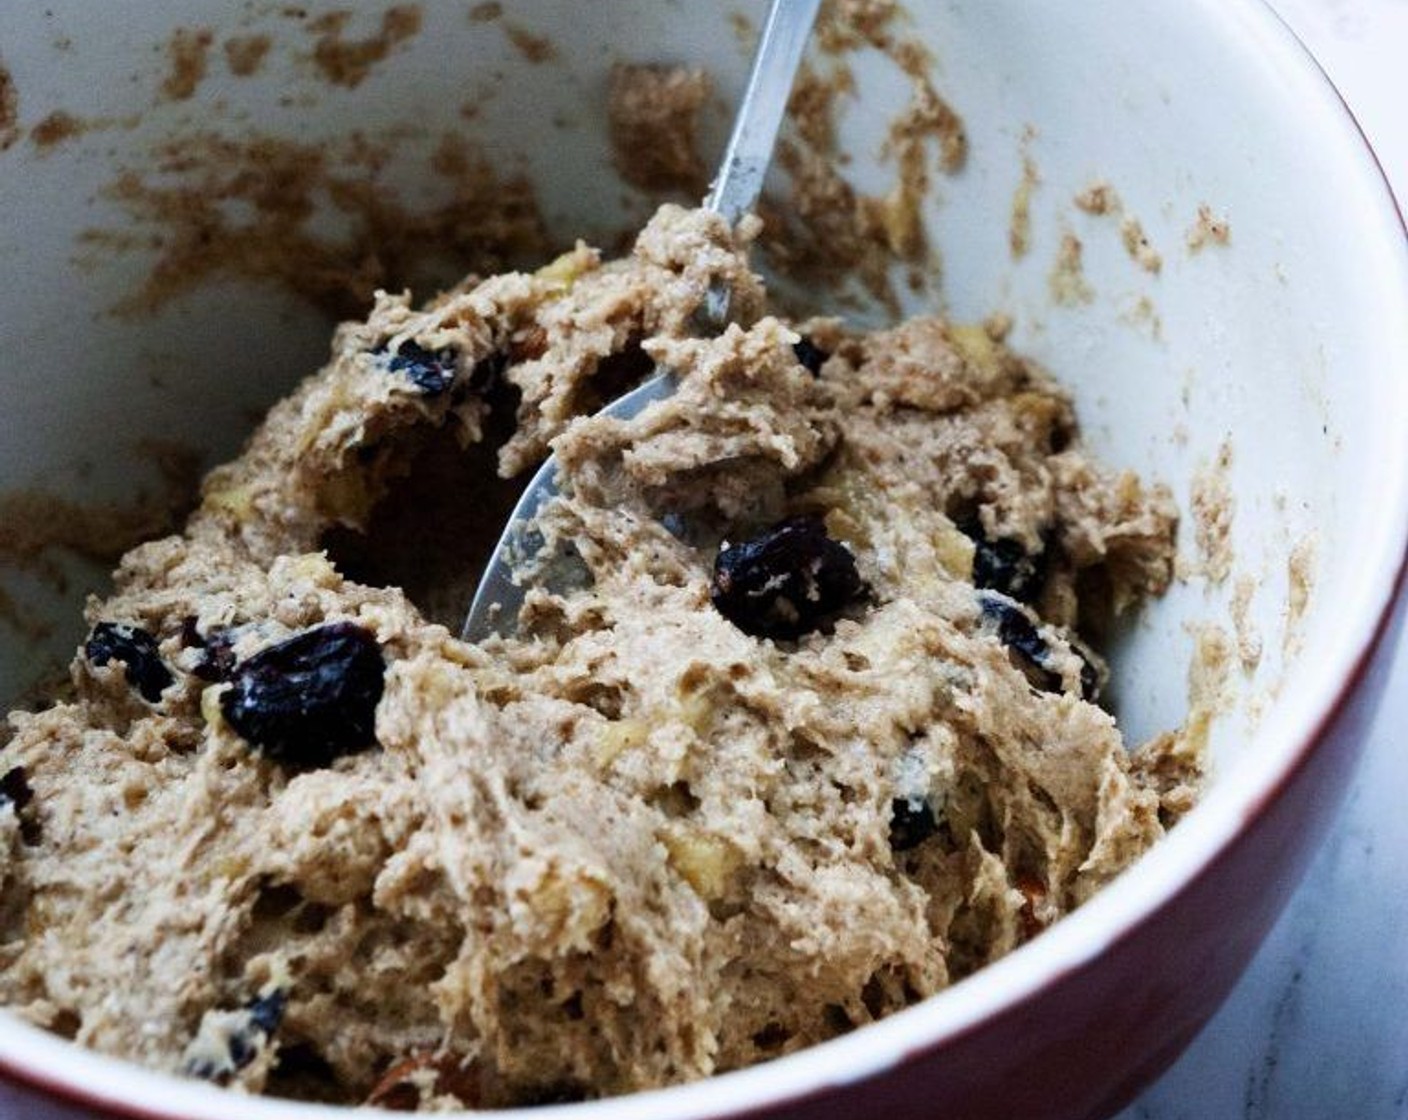 step 5 Add the Barley Flour (1 cup) and while stirring, pour in the Coconut Oil (2 Tbsp). Fold in Mixed Dried Fruits and Nuts (1/2 cup).